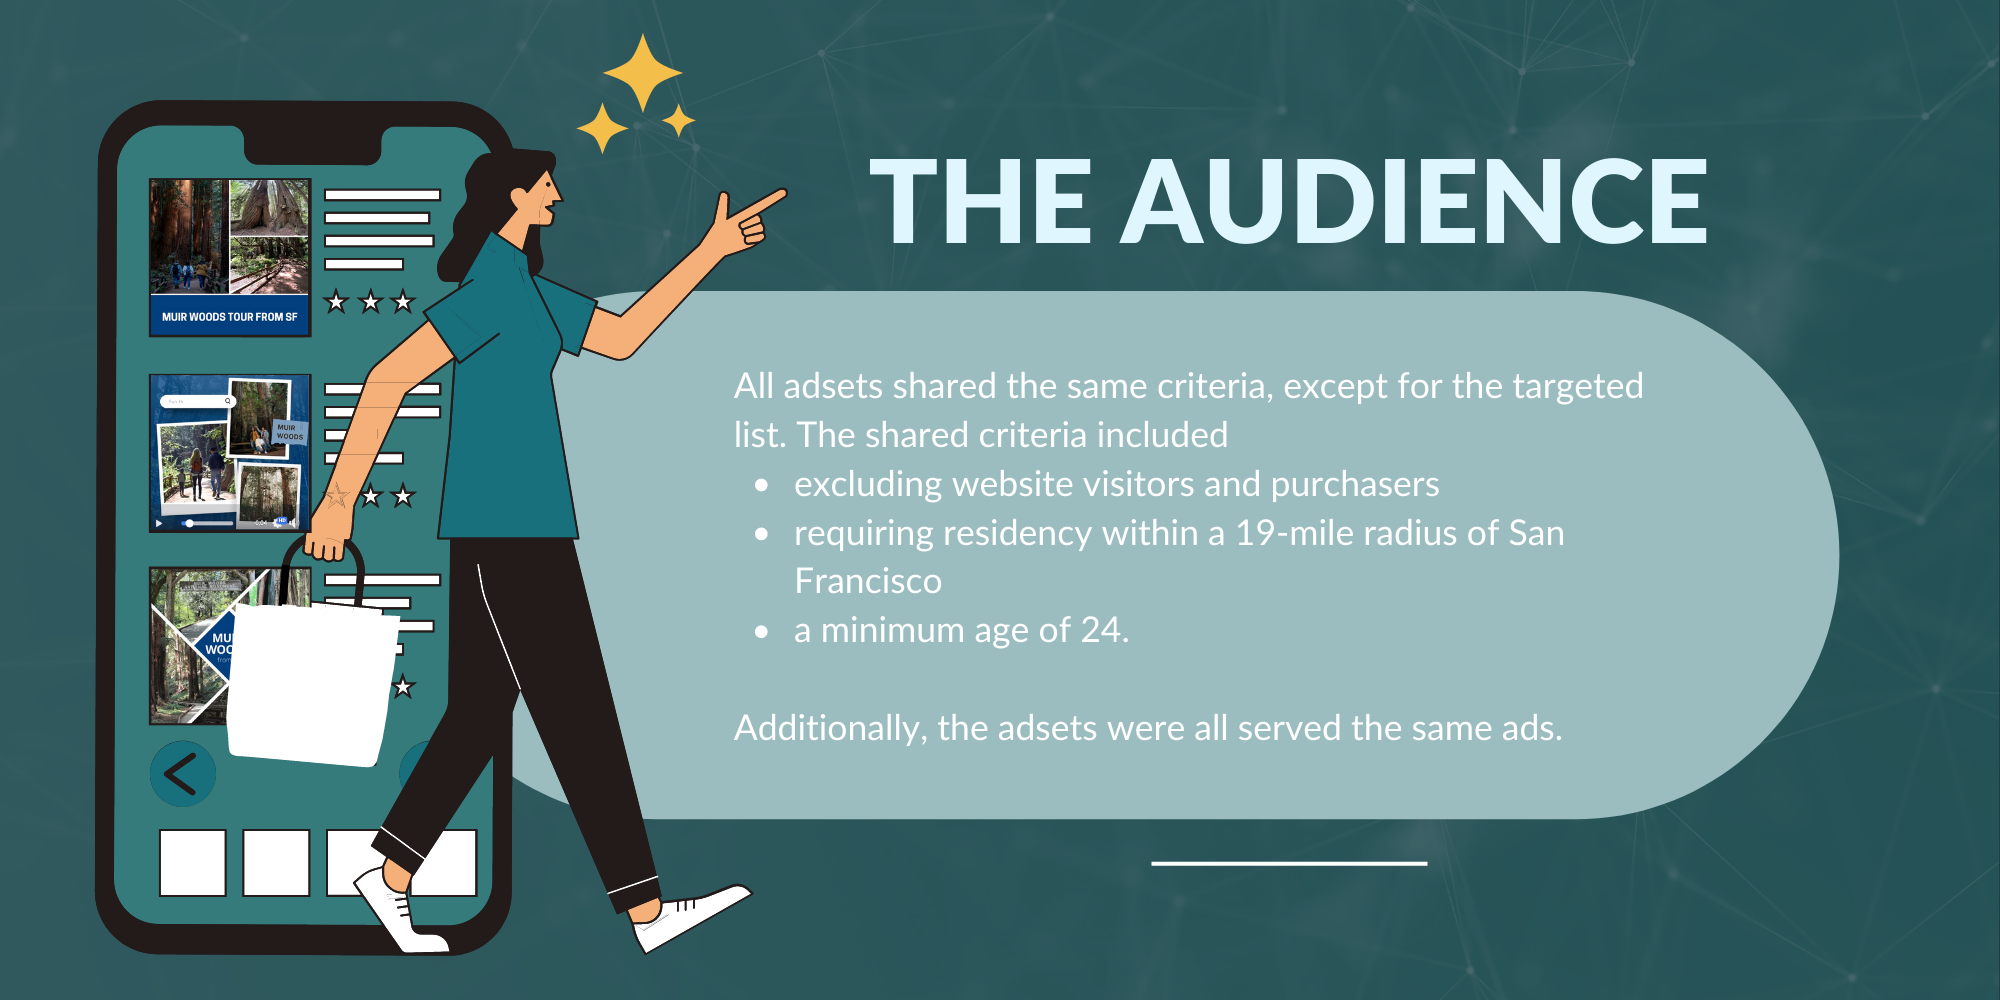 details of the paid social audience including audience exclusions, geographic targeting, and age range